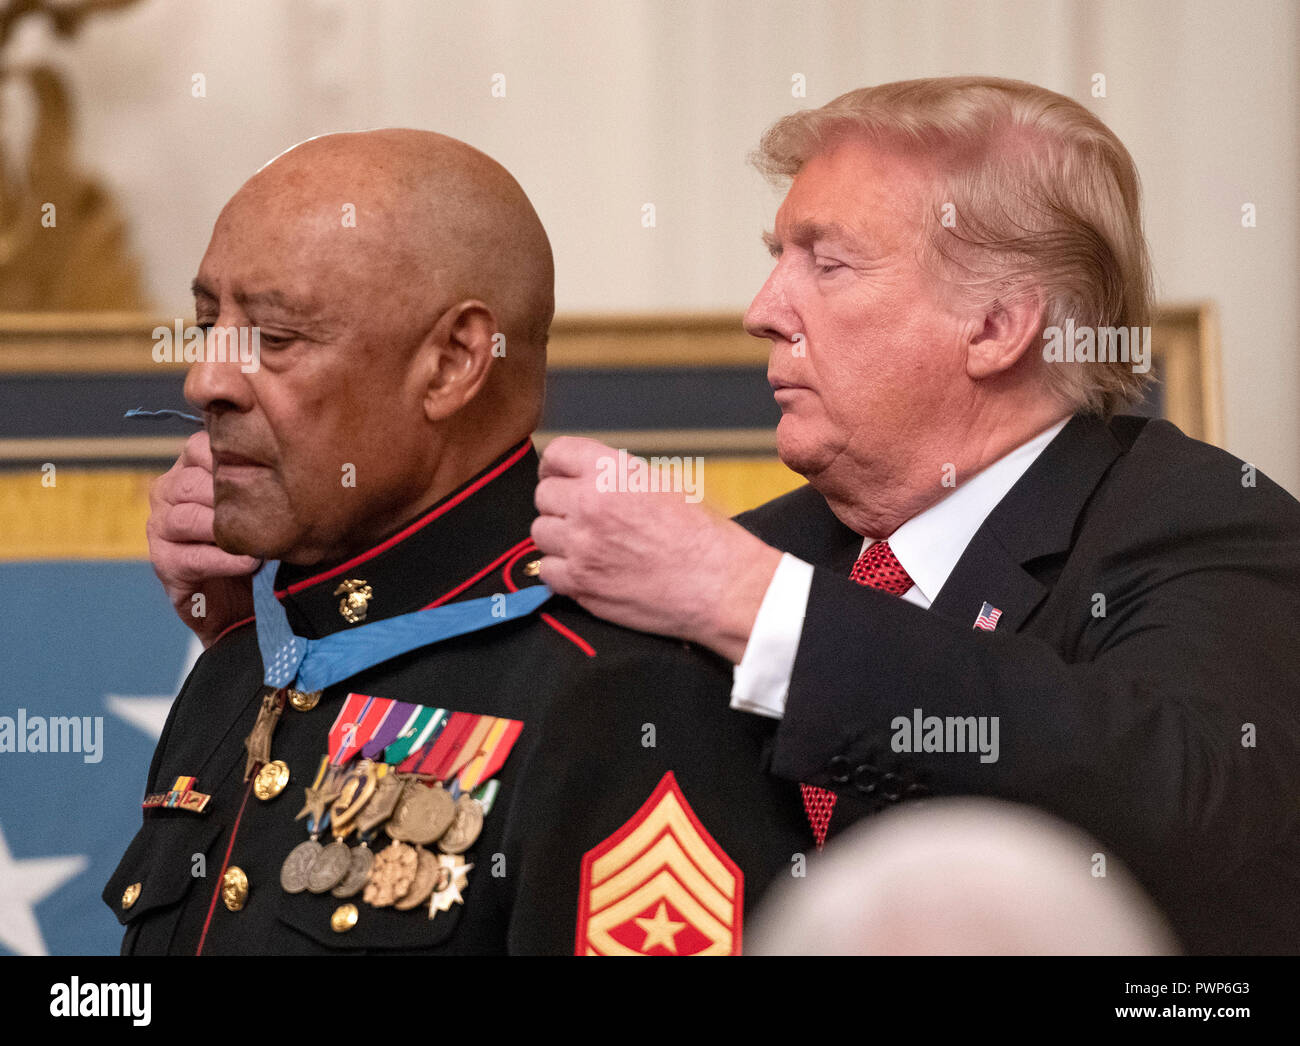 Washington, USA. 17th Oct 2018. United States President Donald J. Trump awards the Medal of Honor to Sergeant Major John L. Canley, United States Marine Corps (Retired), for conspicuous gallantry during the Vietnam War in a ceremony in the East Room of the the White House in Washington, DC on Wednesday, October 17, 2018. Credit: Ron Sachs/CNP/MediaPunch Credit: MediaPunch Inc/Alamy Live News Stock Photo